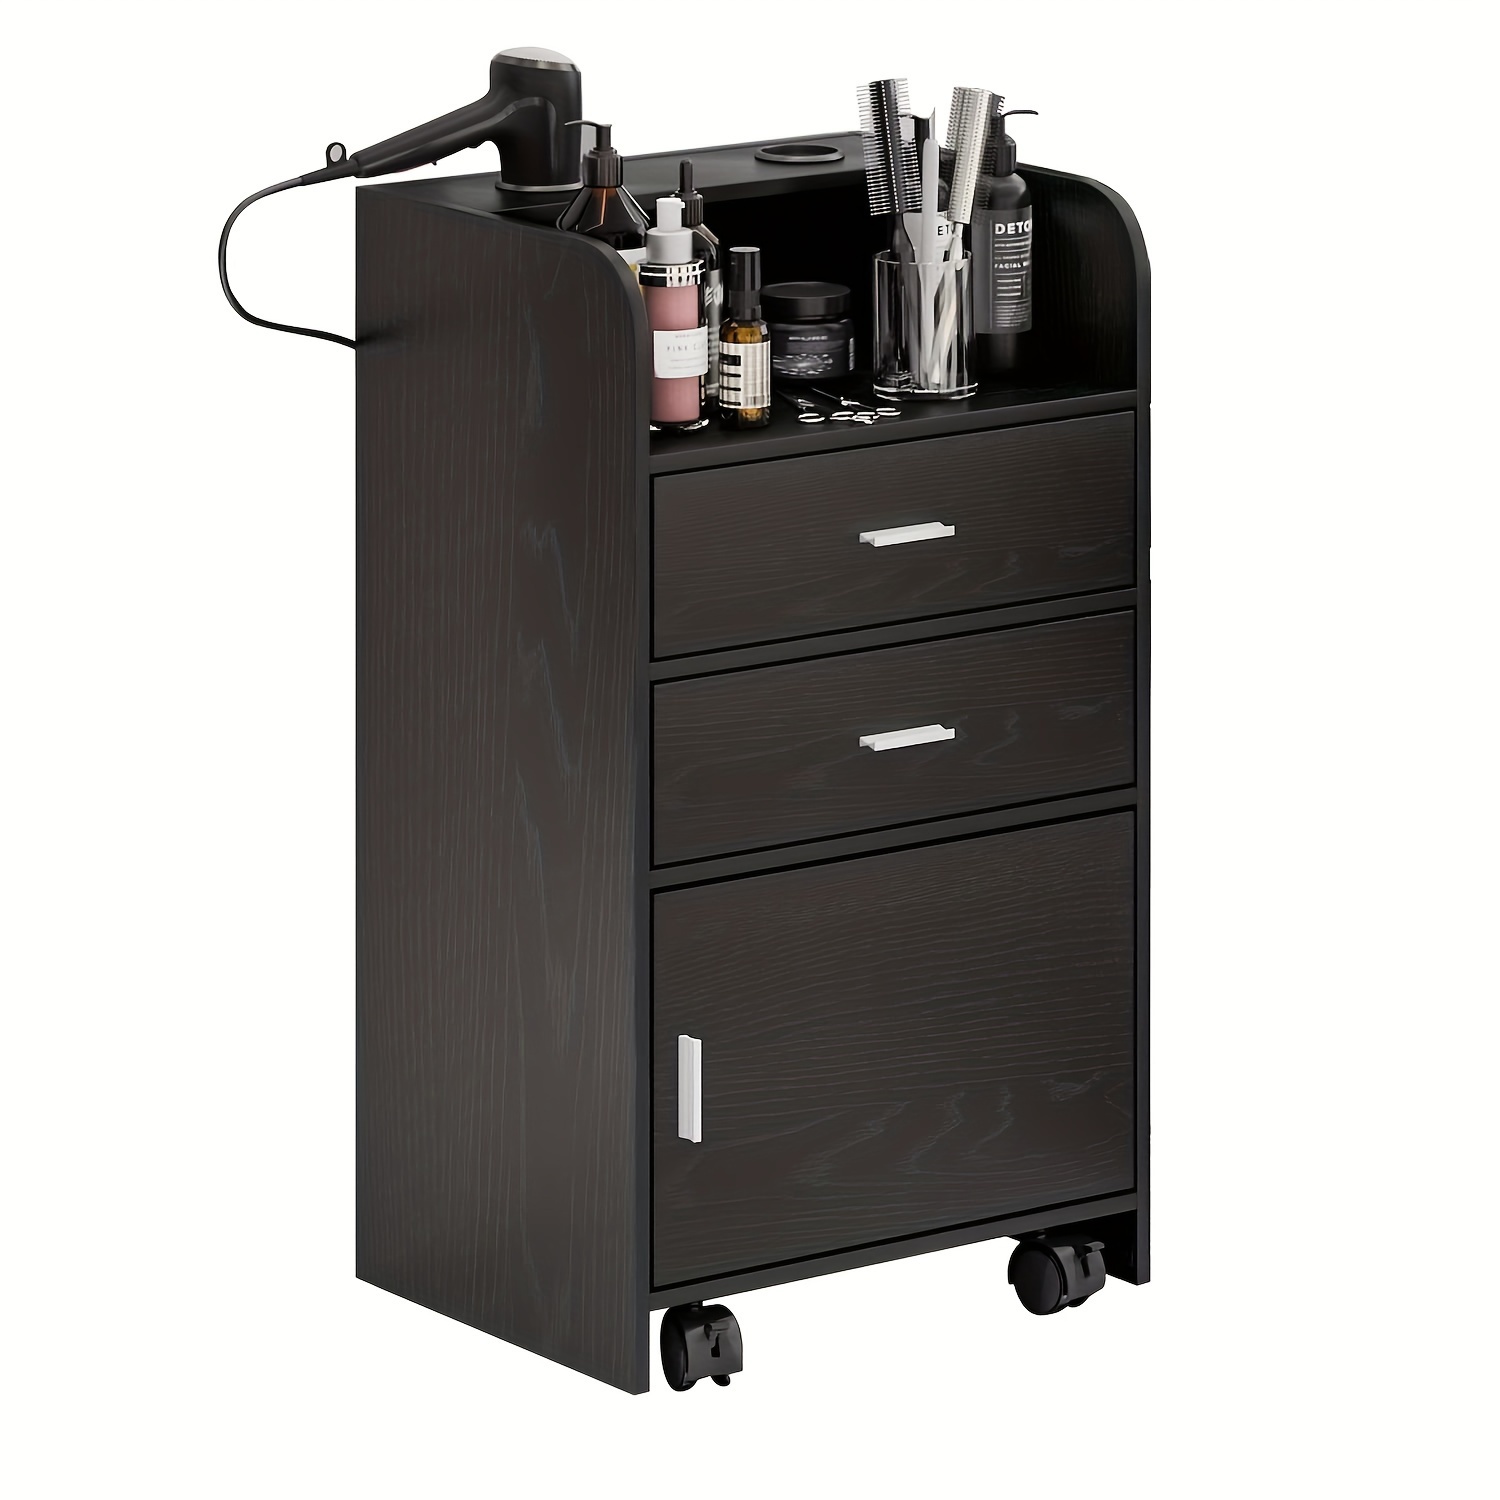 

Salon Station On Wheels, Beauty Salon Station For Hair Stylist, Barber Stations Storage Cabinet With 2 Drawers & Large Cabinet, Rolling Hair Stylist Station With 2 Hair Dryer Holders